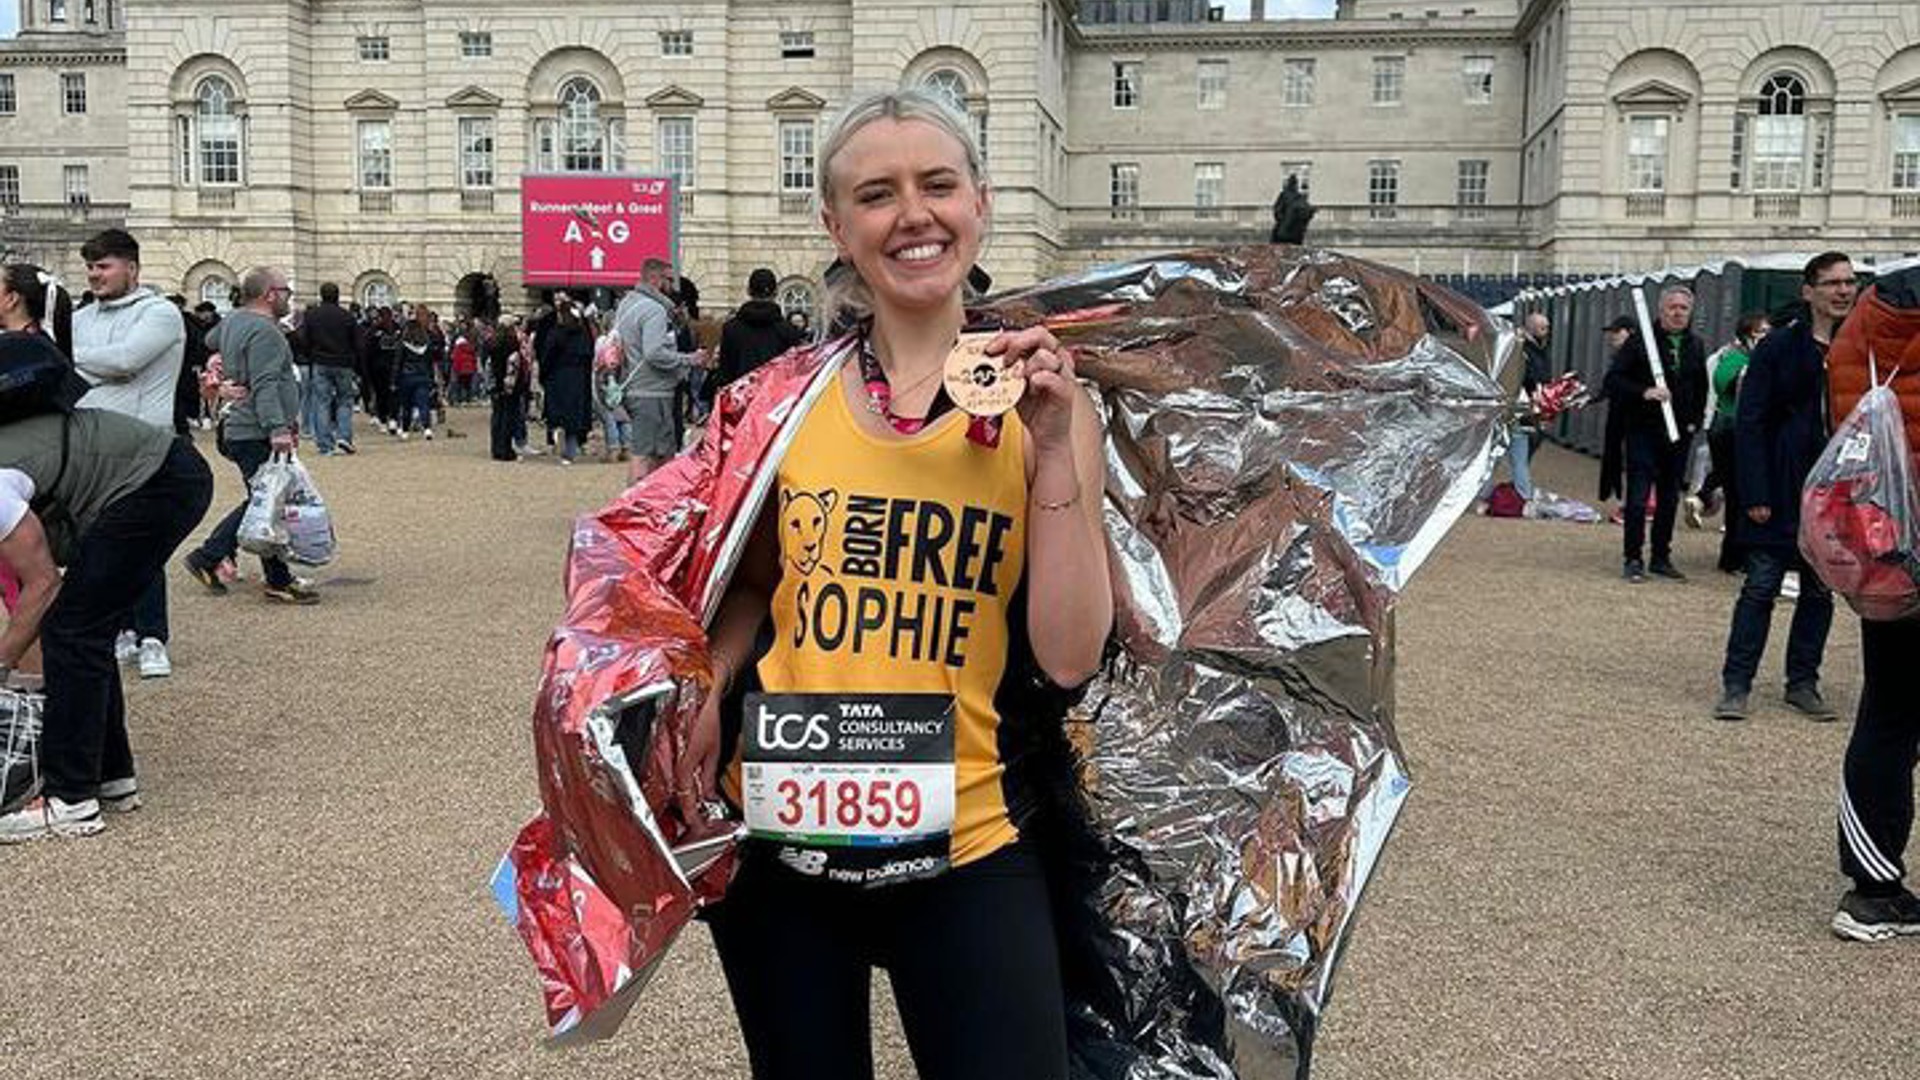 A woman wearing a Born Free running vest, holding a London Marathon medal, wrapped in a foil blanket